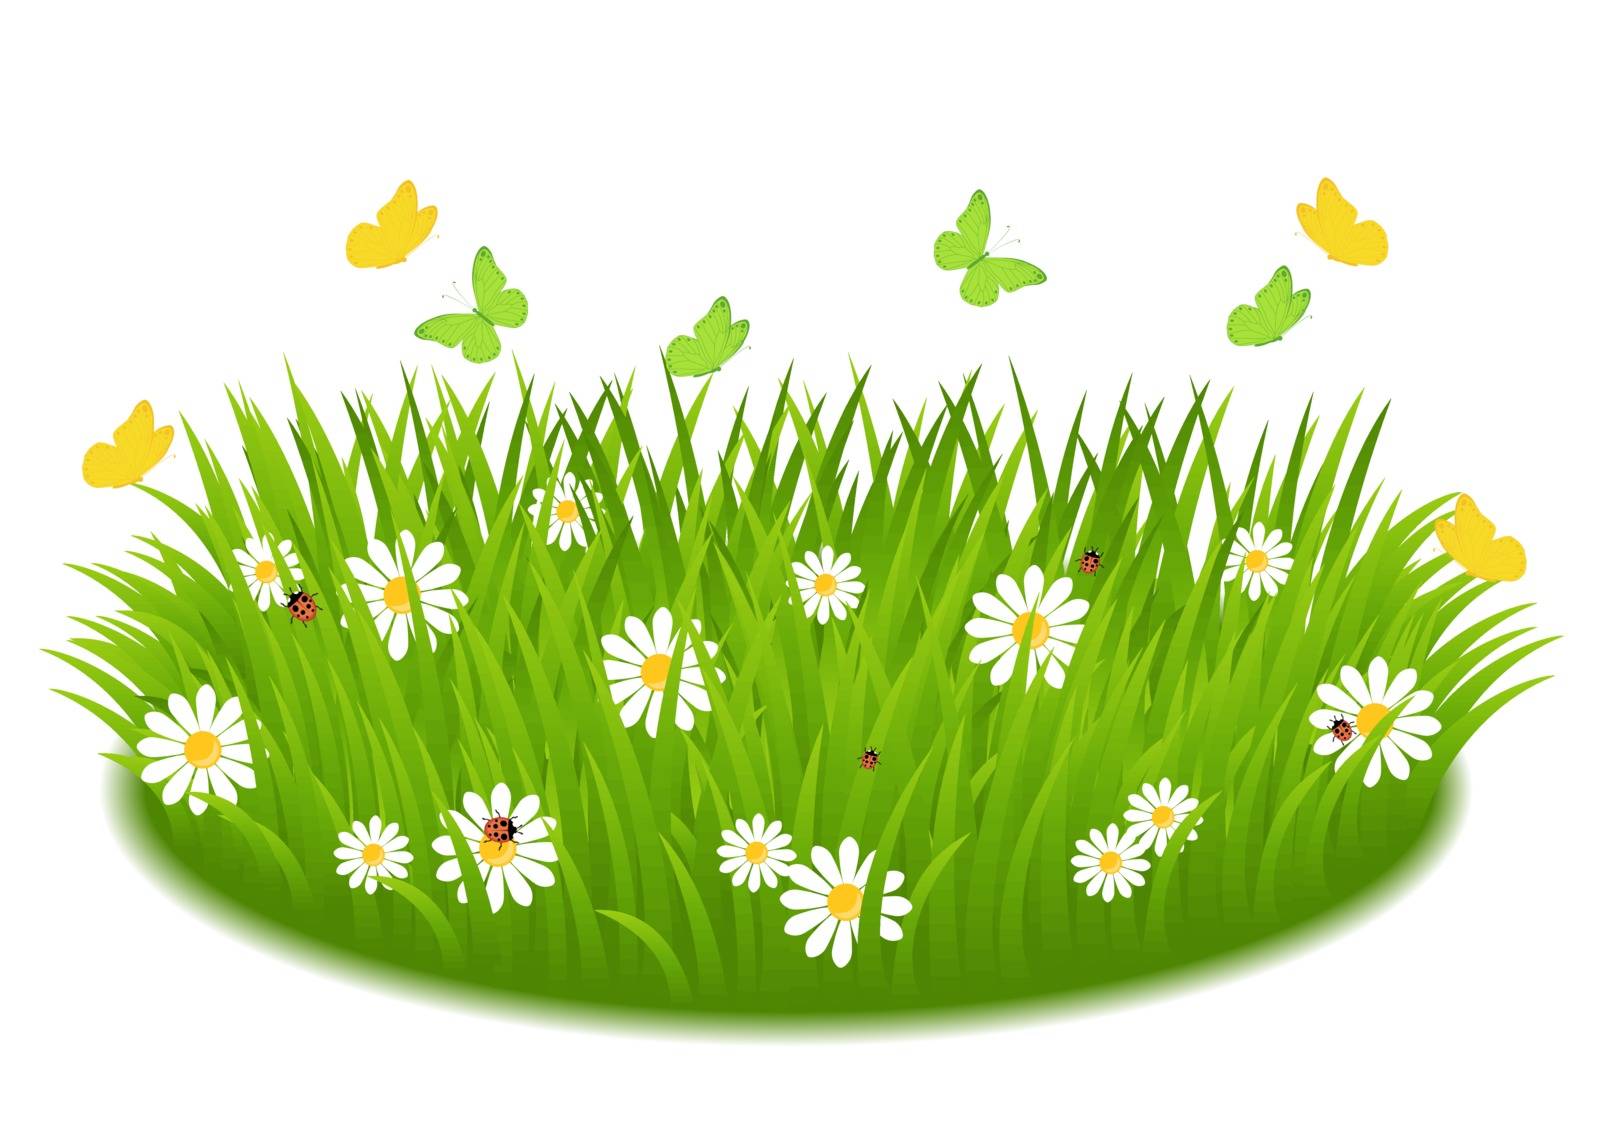 green grass with daisies, butterfly and ladybugs